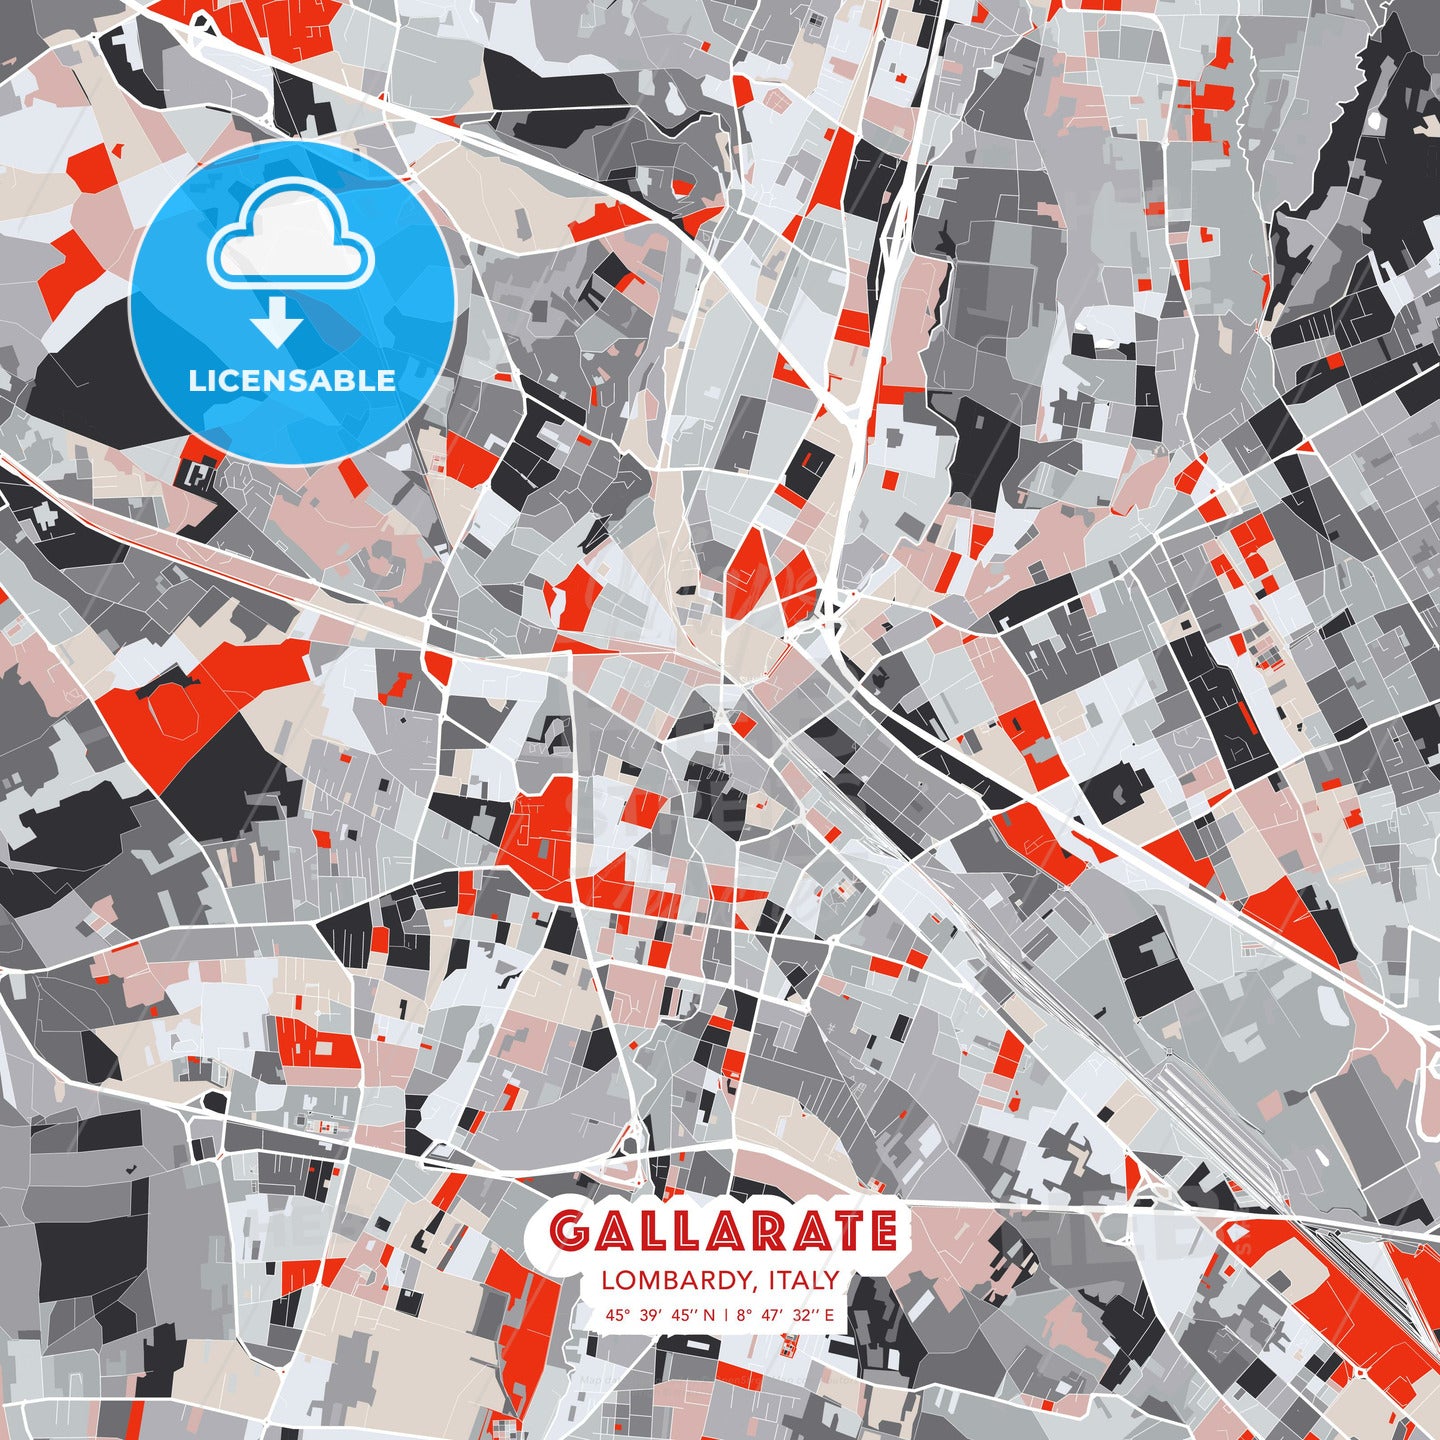 Gallarate, Lombardy, Italy, modern map - HEBSTREITS Sketches